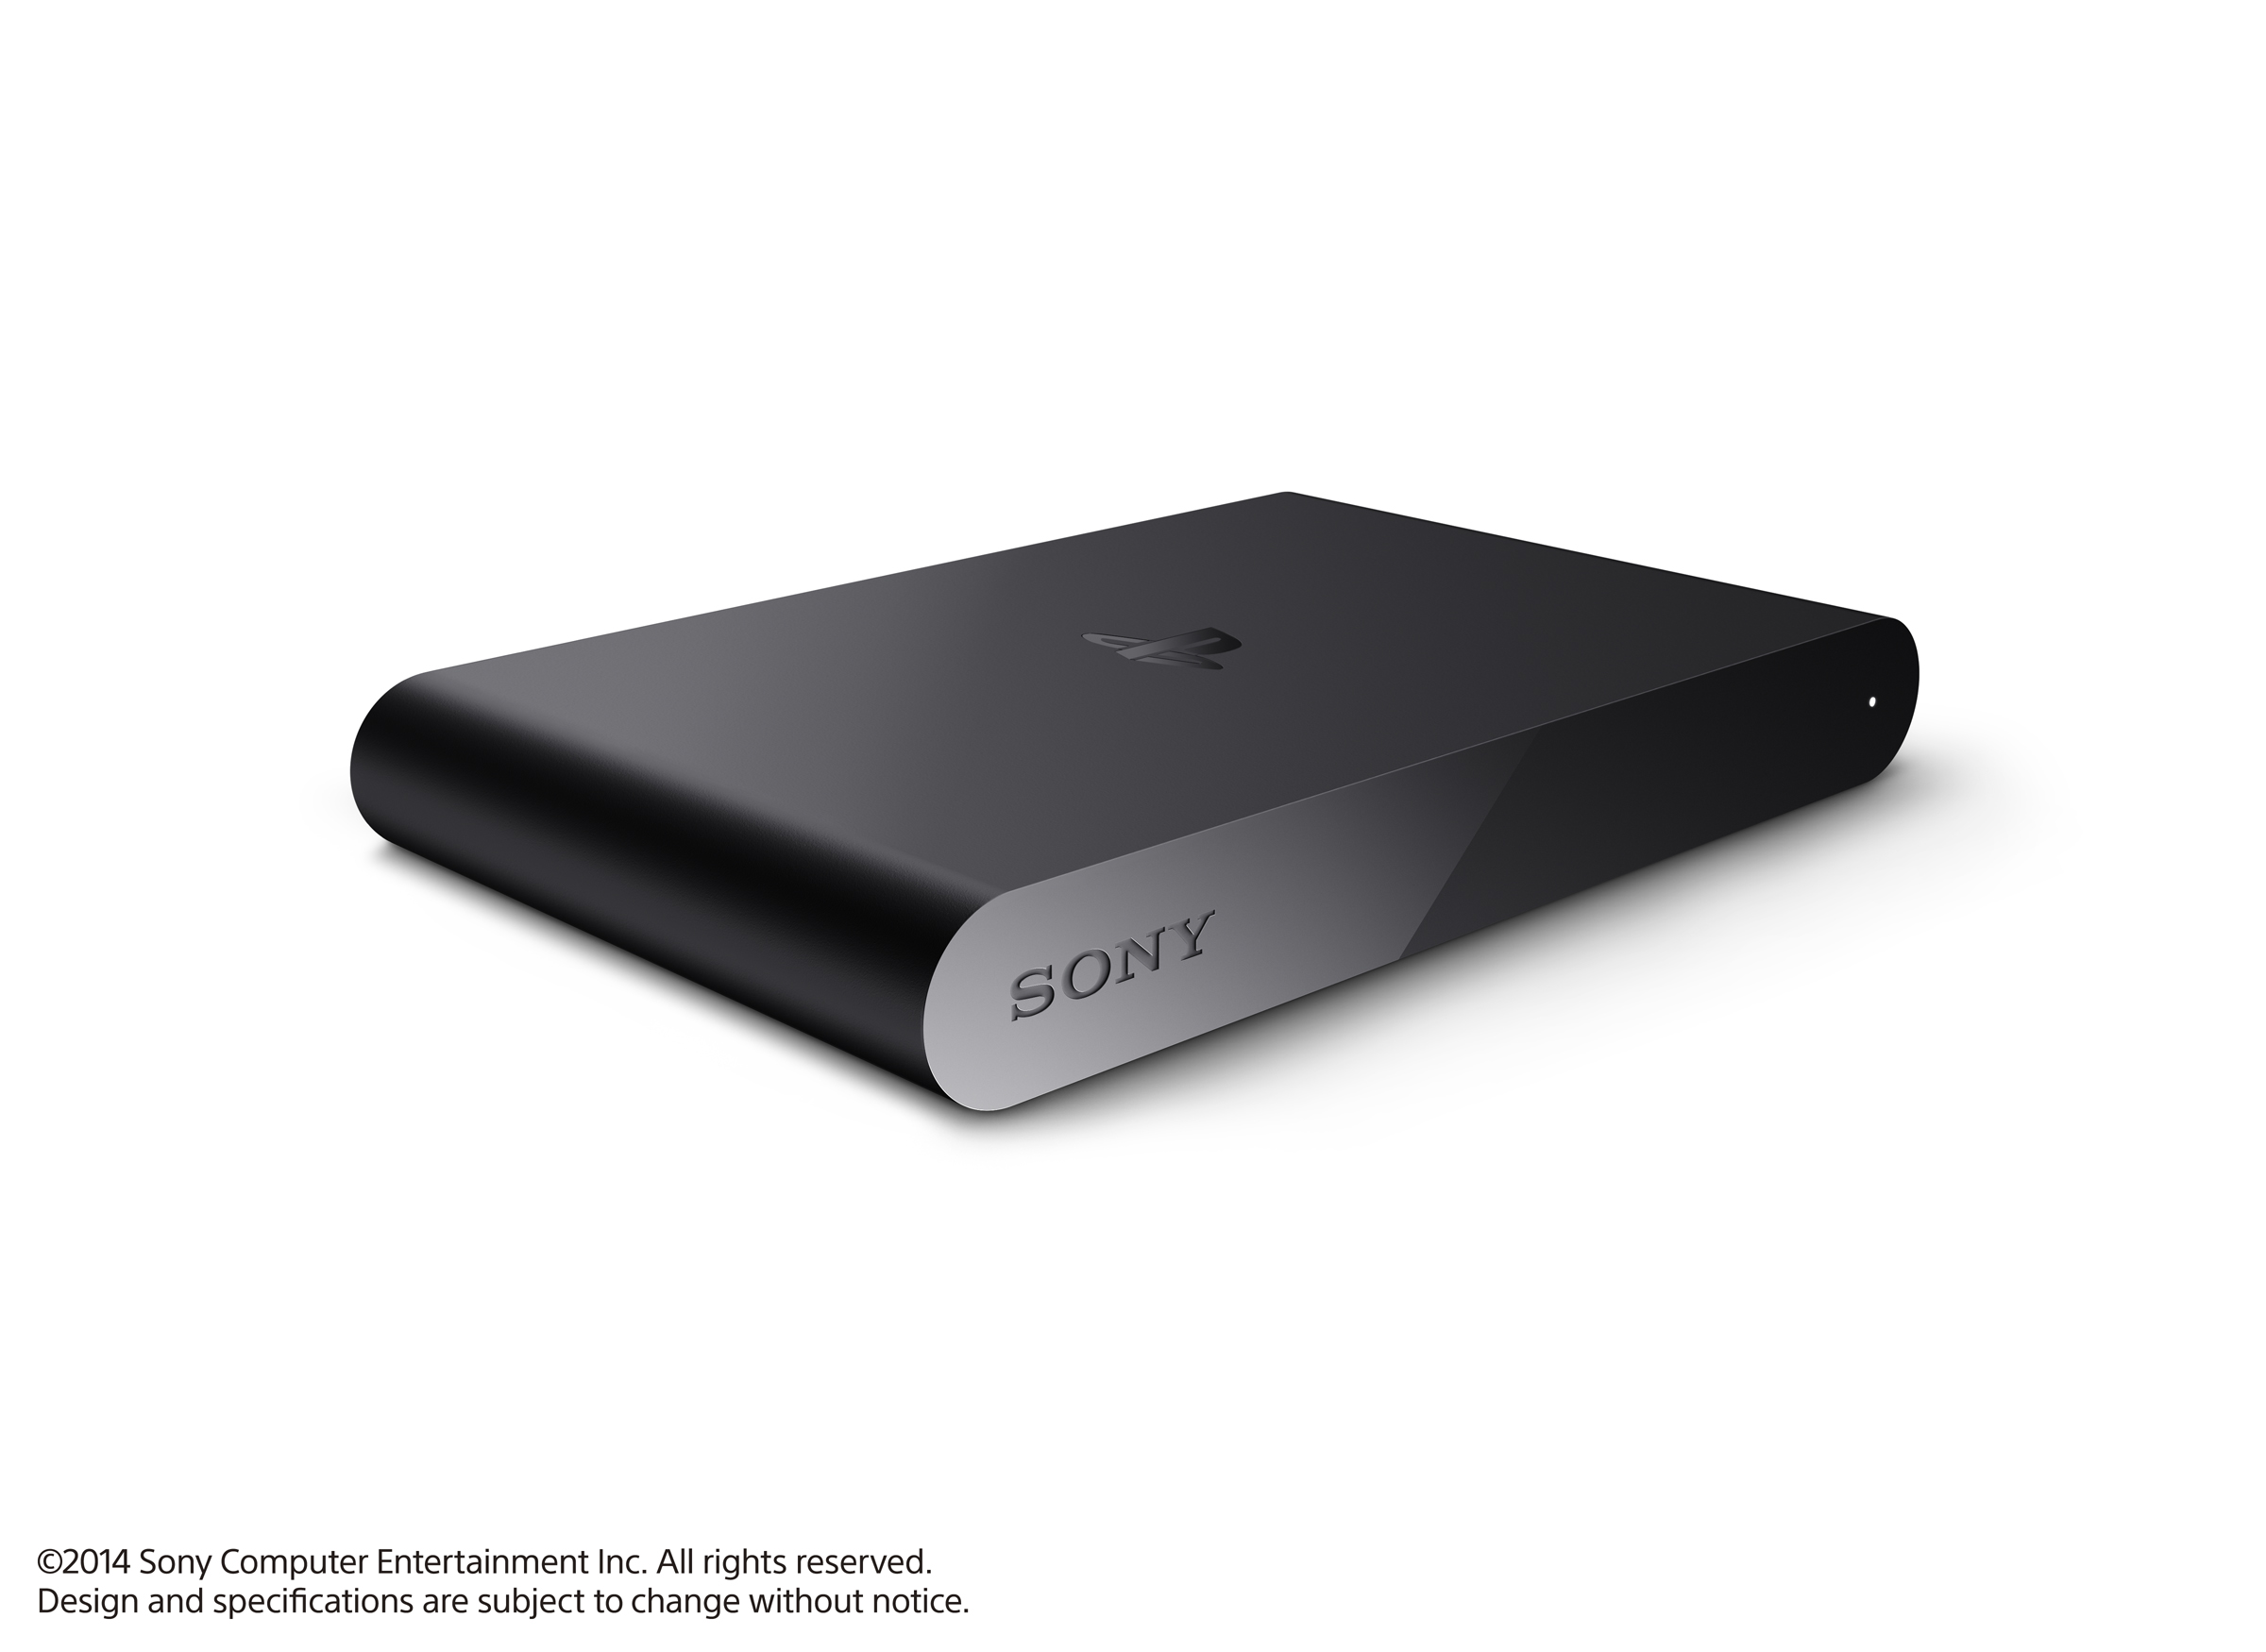 Hardware Review: PlayStation TV - Vita Player - the one-stop